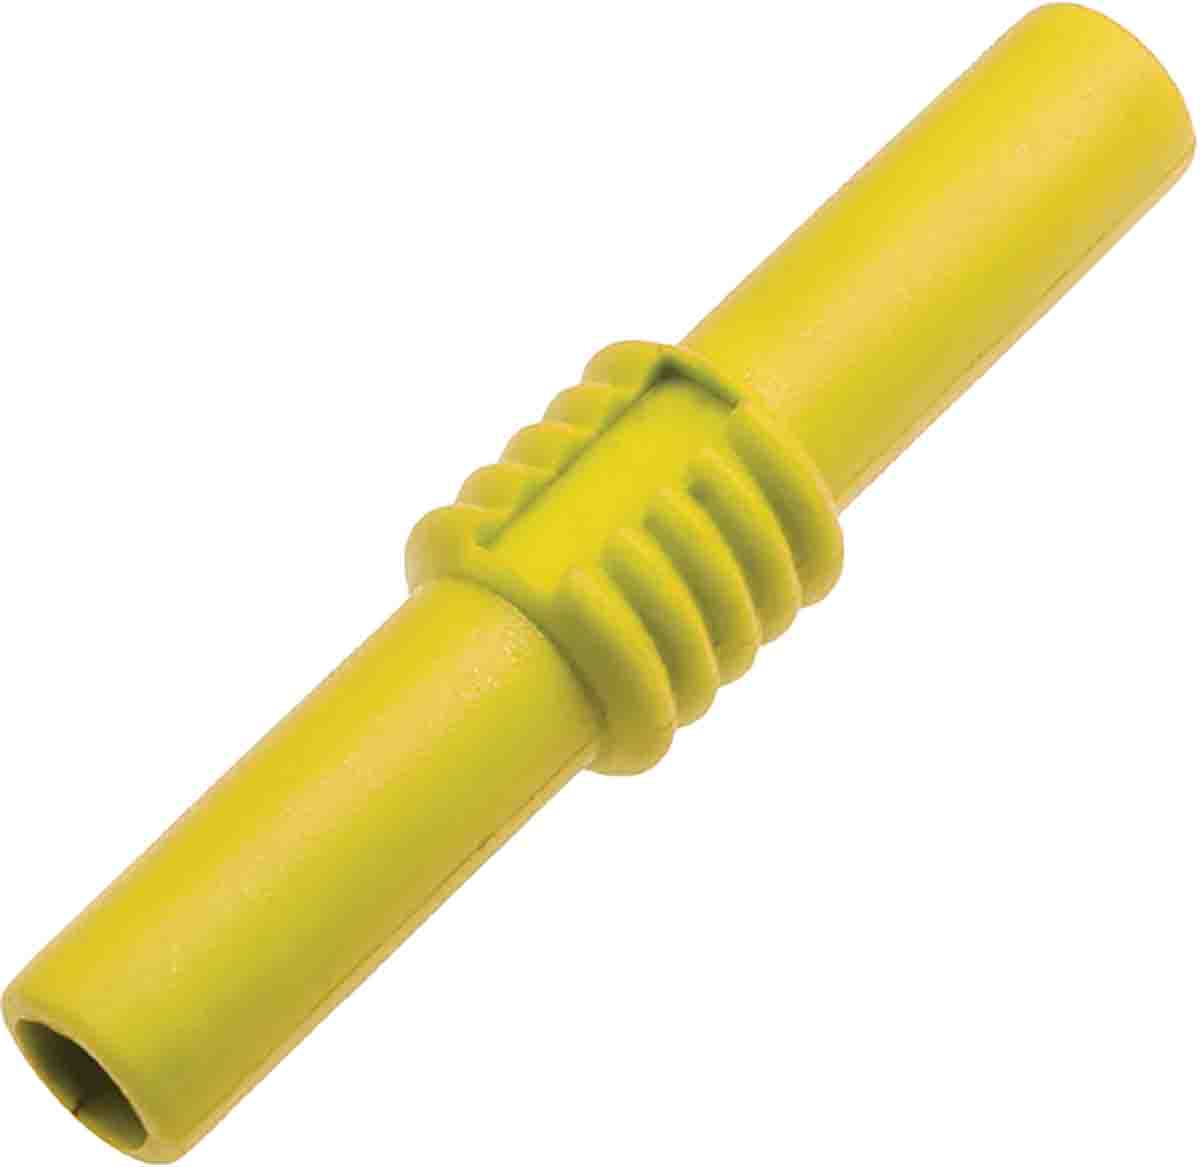 RS PRO Yellow, Female Banana Coupler With Brass contacts and Nickel Plated